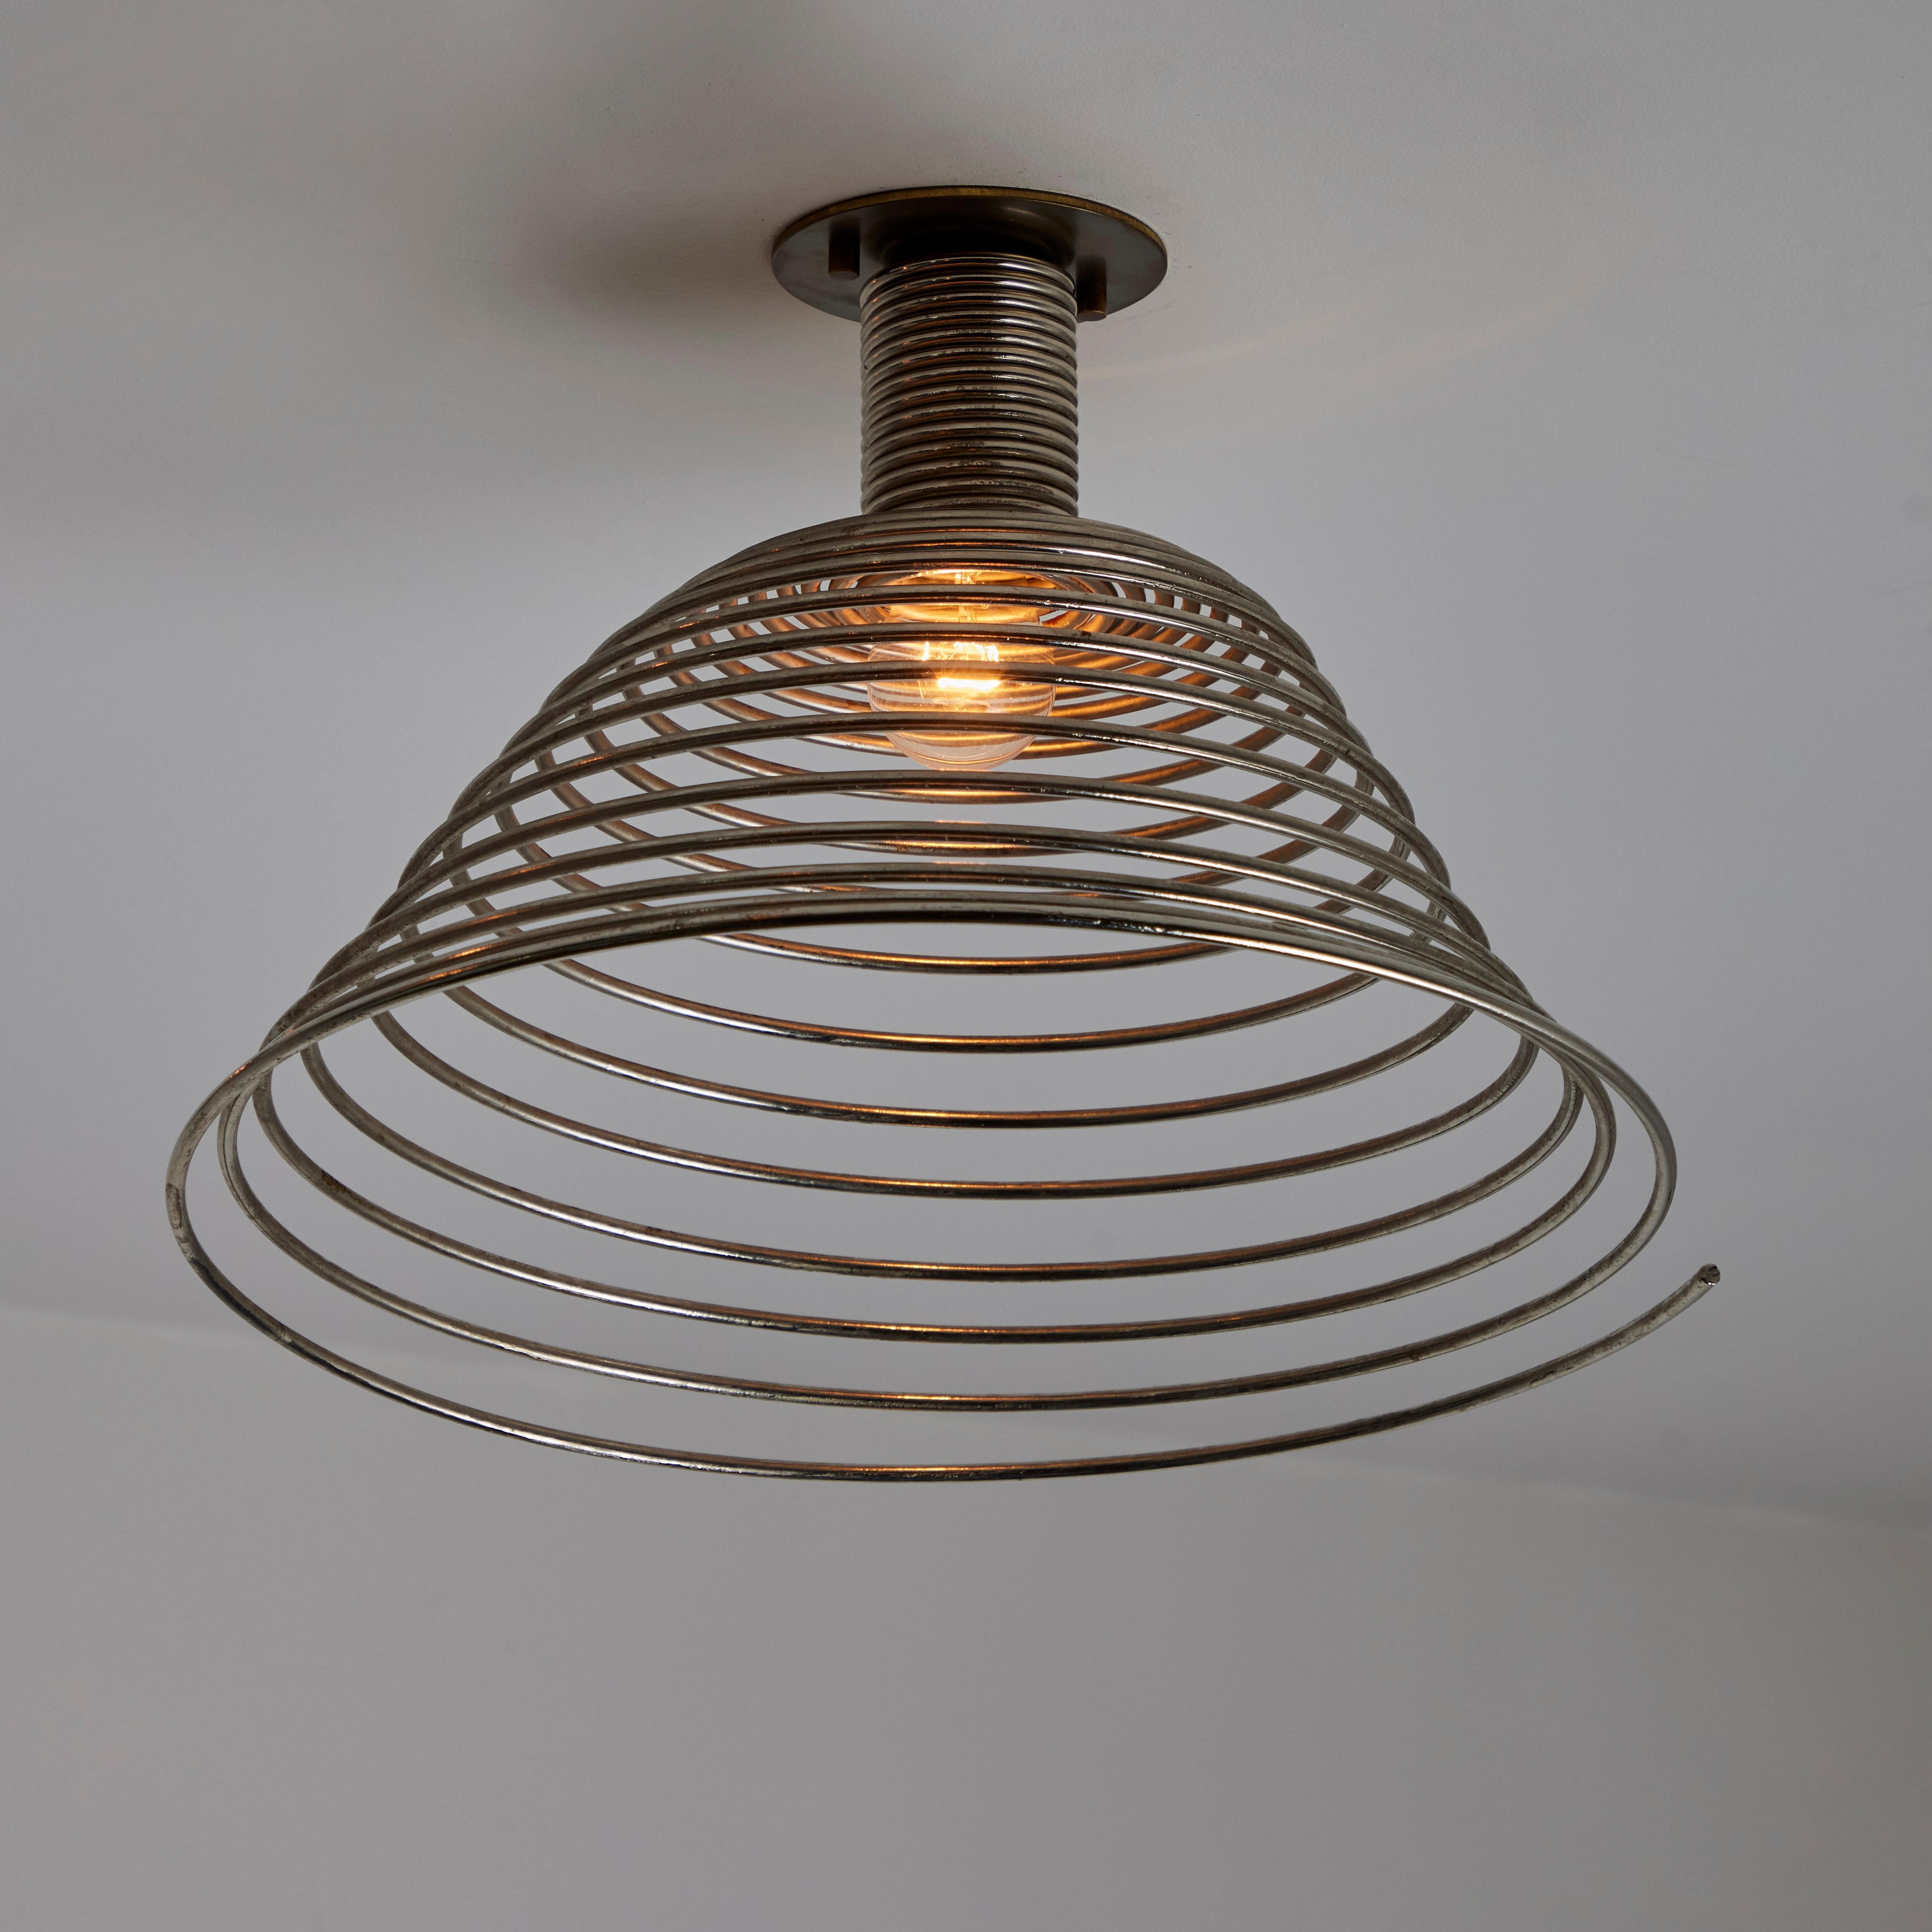 Italian Single 'Spirali' Ceiling or Wall Light by Angelo Mangiarotti for Candle For Sale